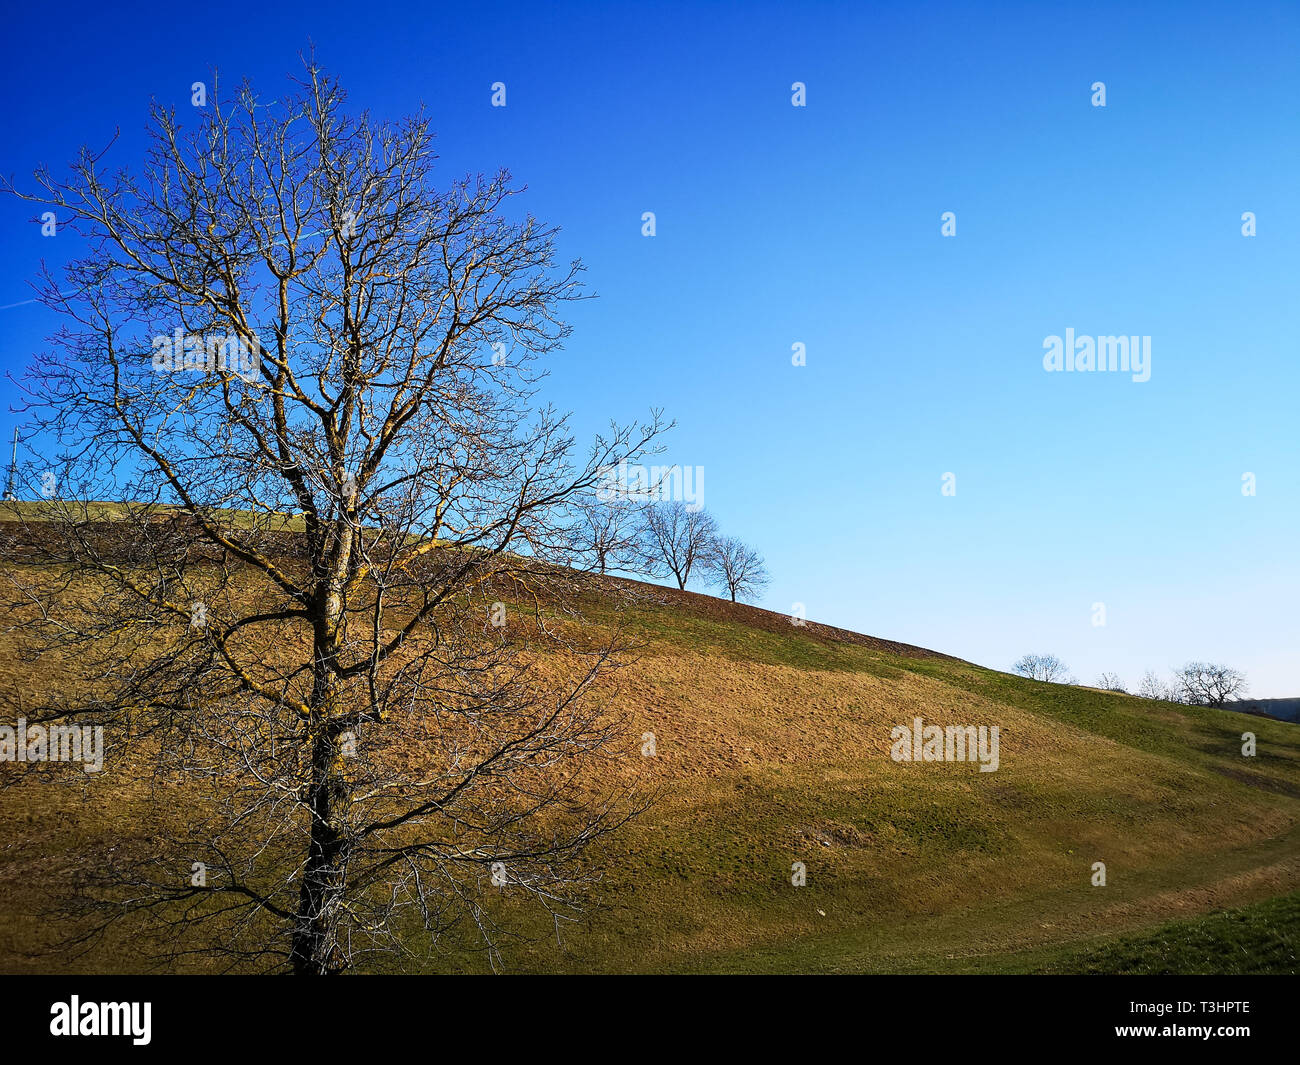 Lonely bare tree in the hills and blue sky. Stock Photo